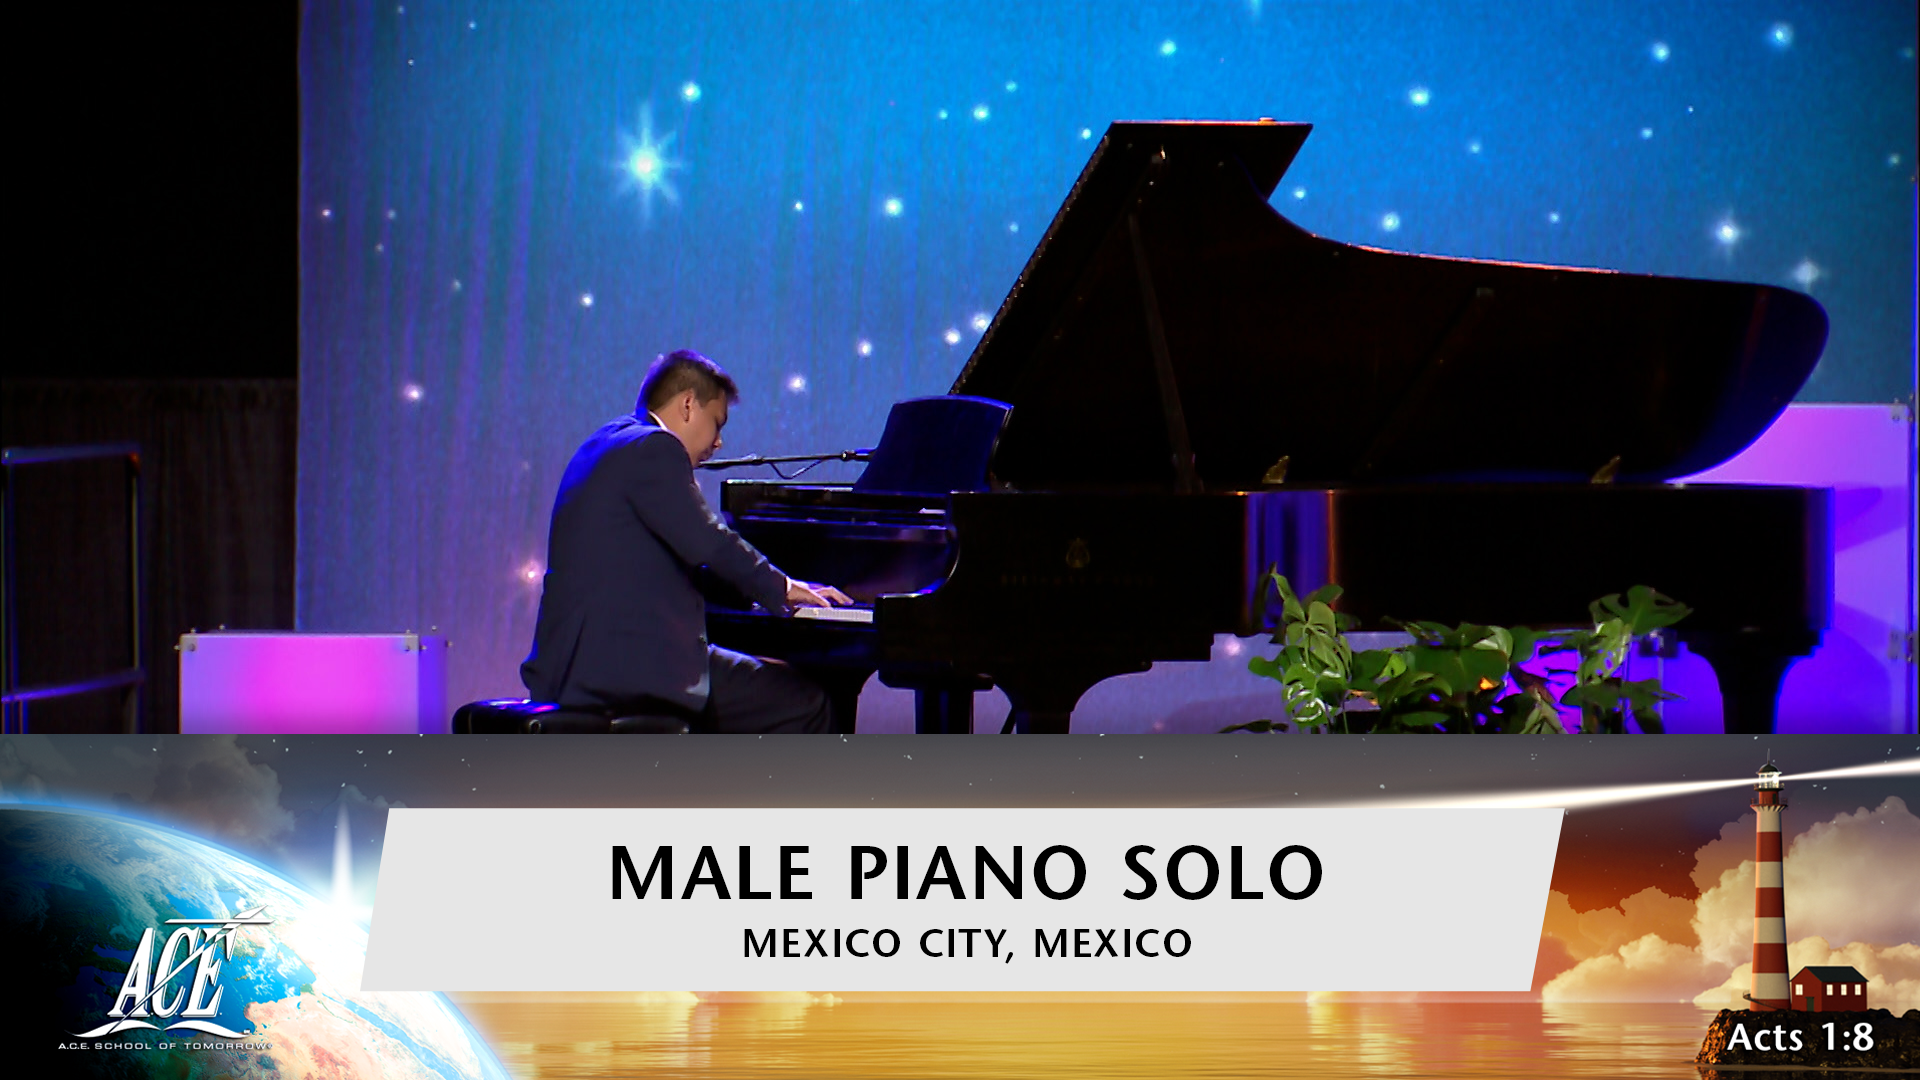 Male Piano Solo, “All Creatures of Our God and King” - ISC 2022